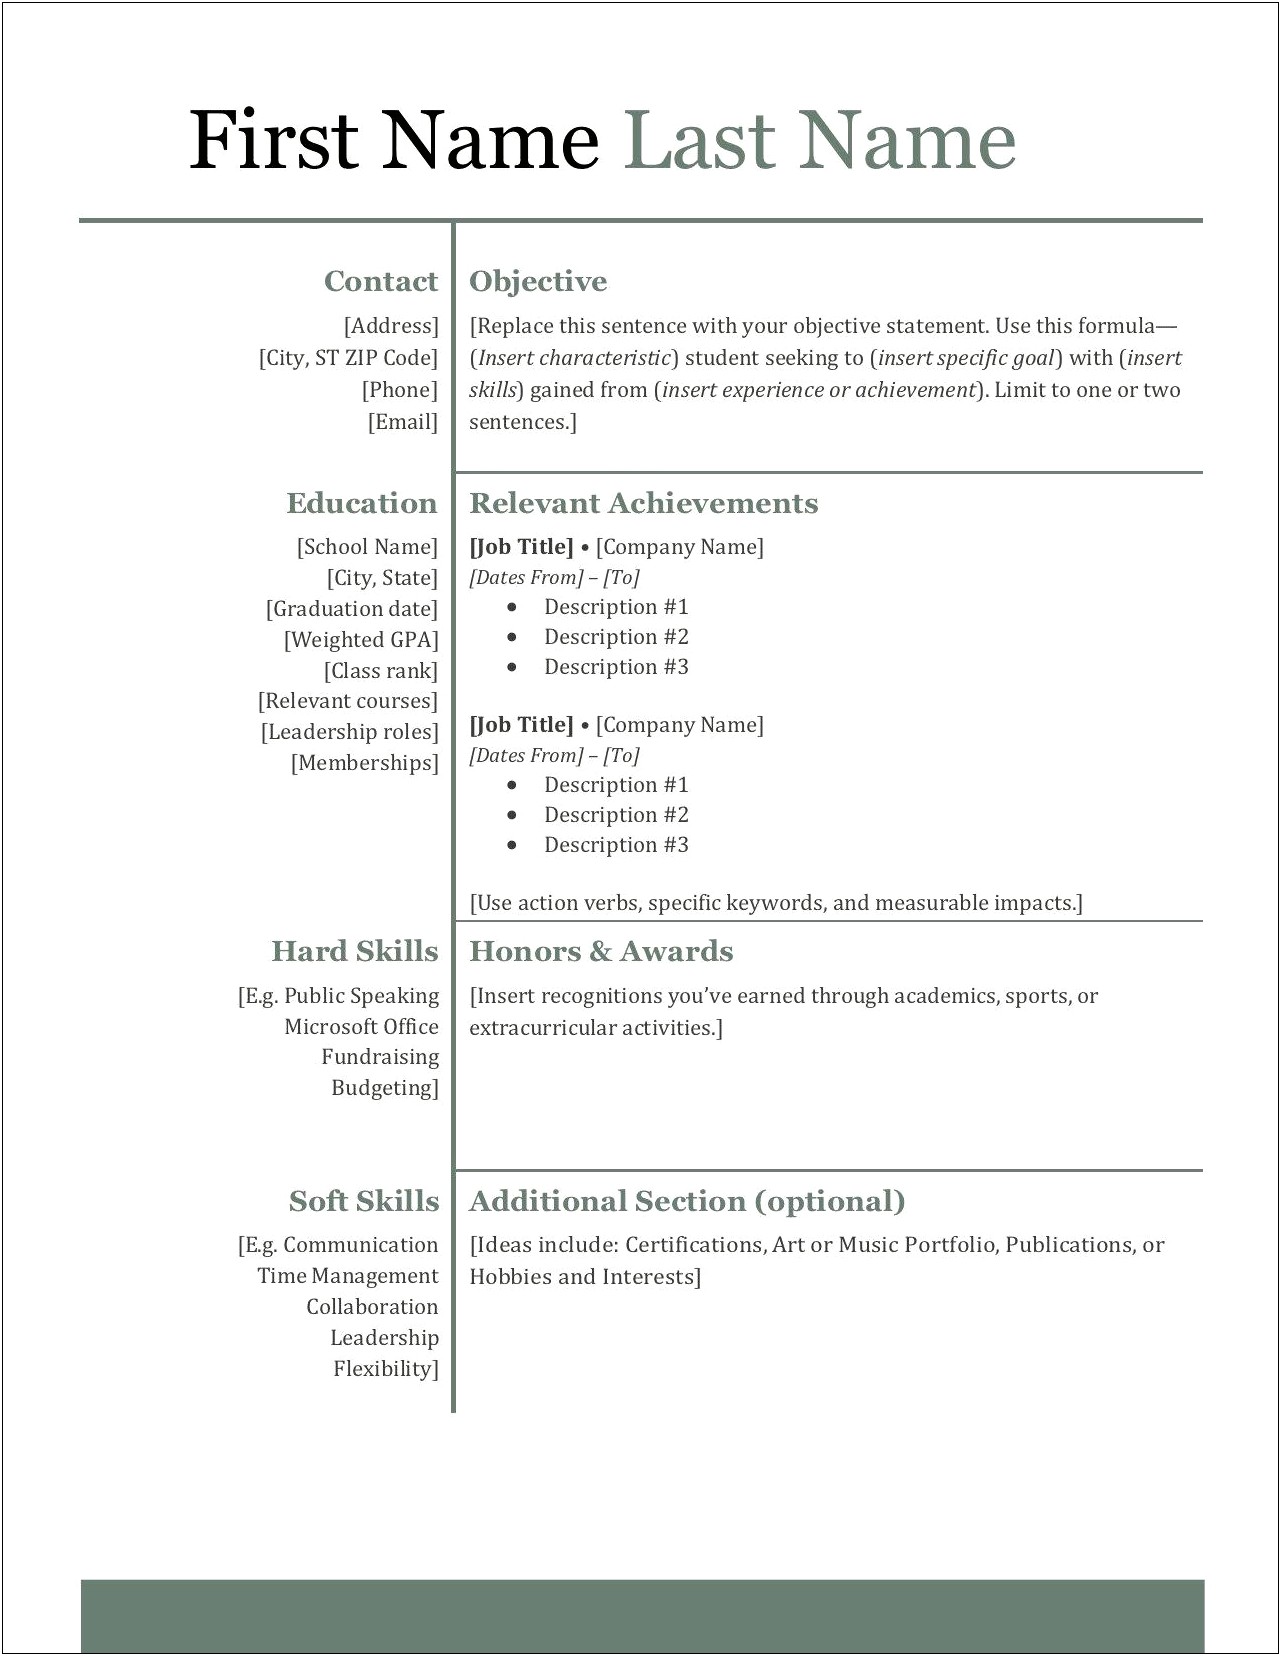 Professional Skills To Include In A Resume